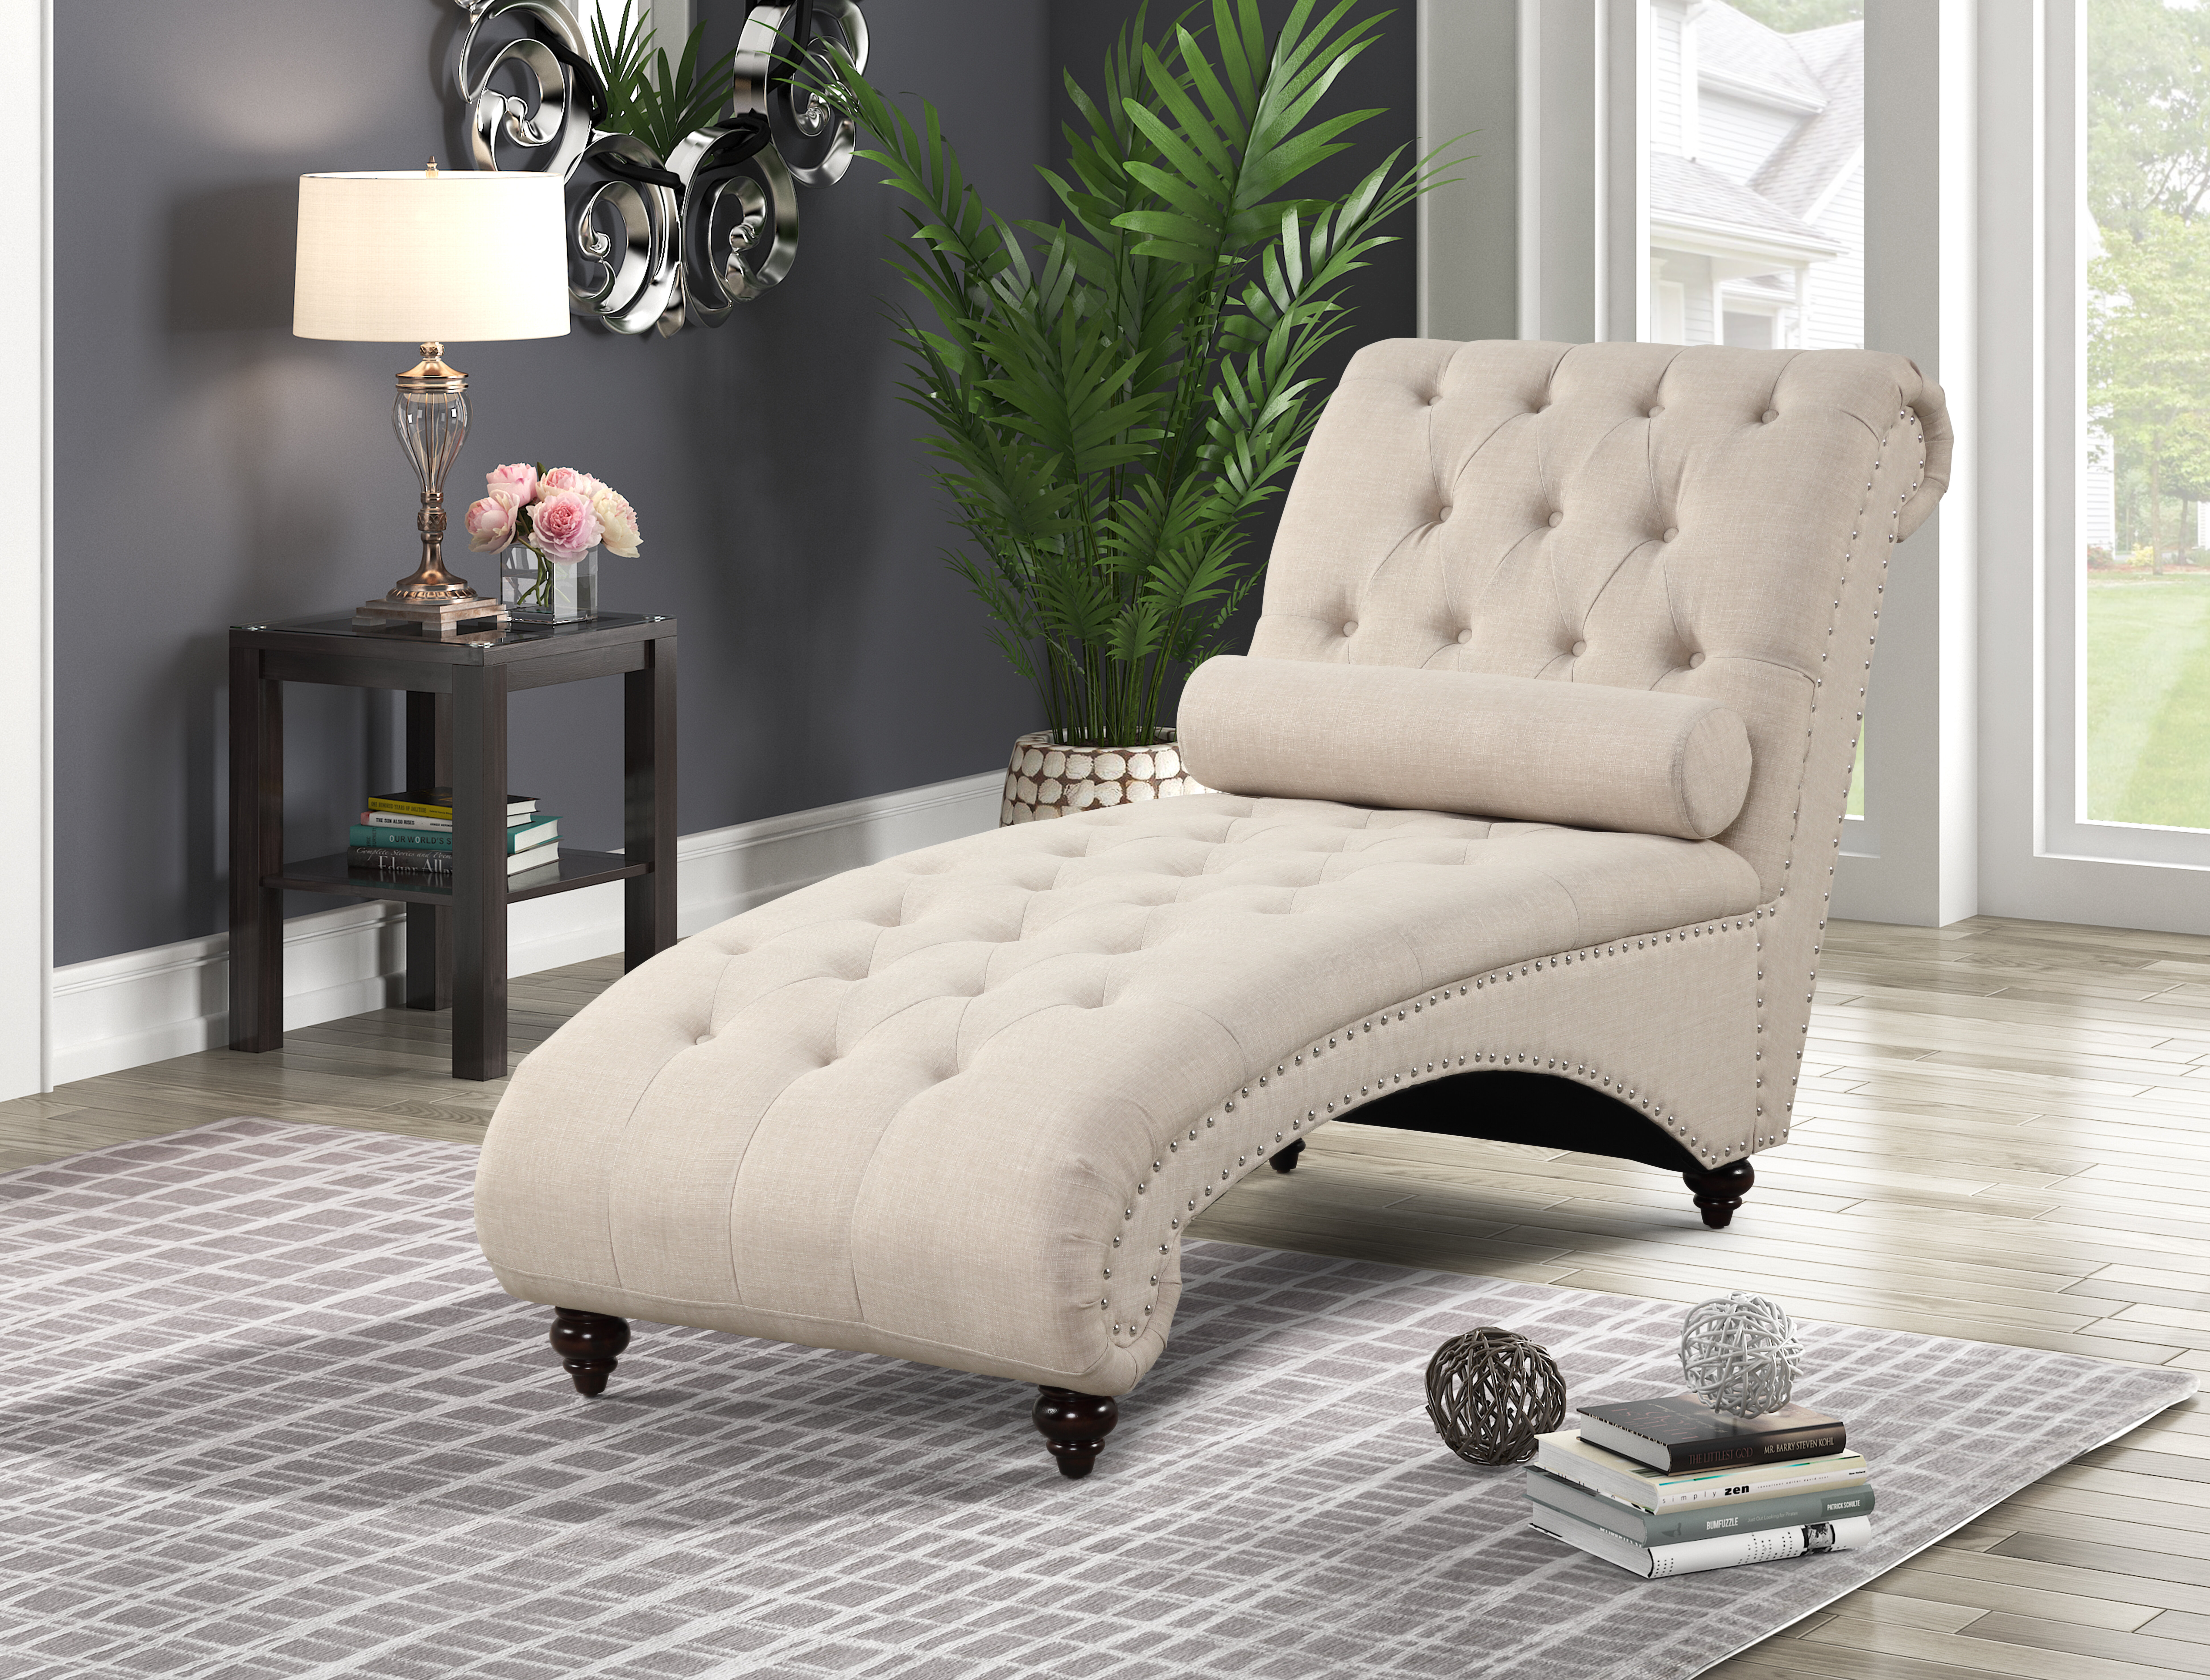 Fenton Upholstered Chaise Lounge